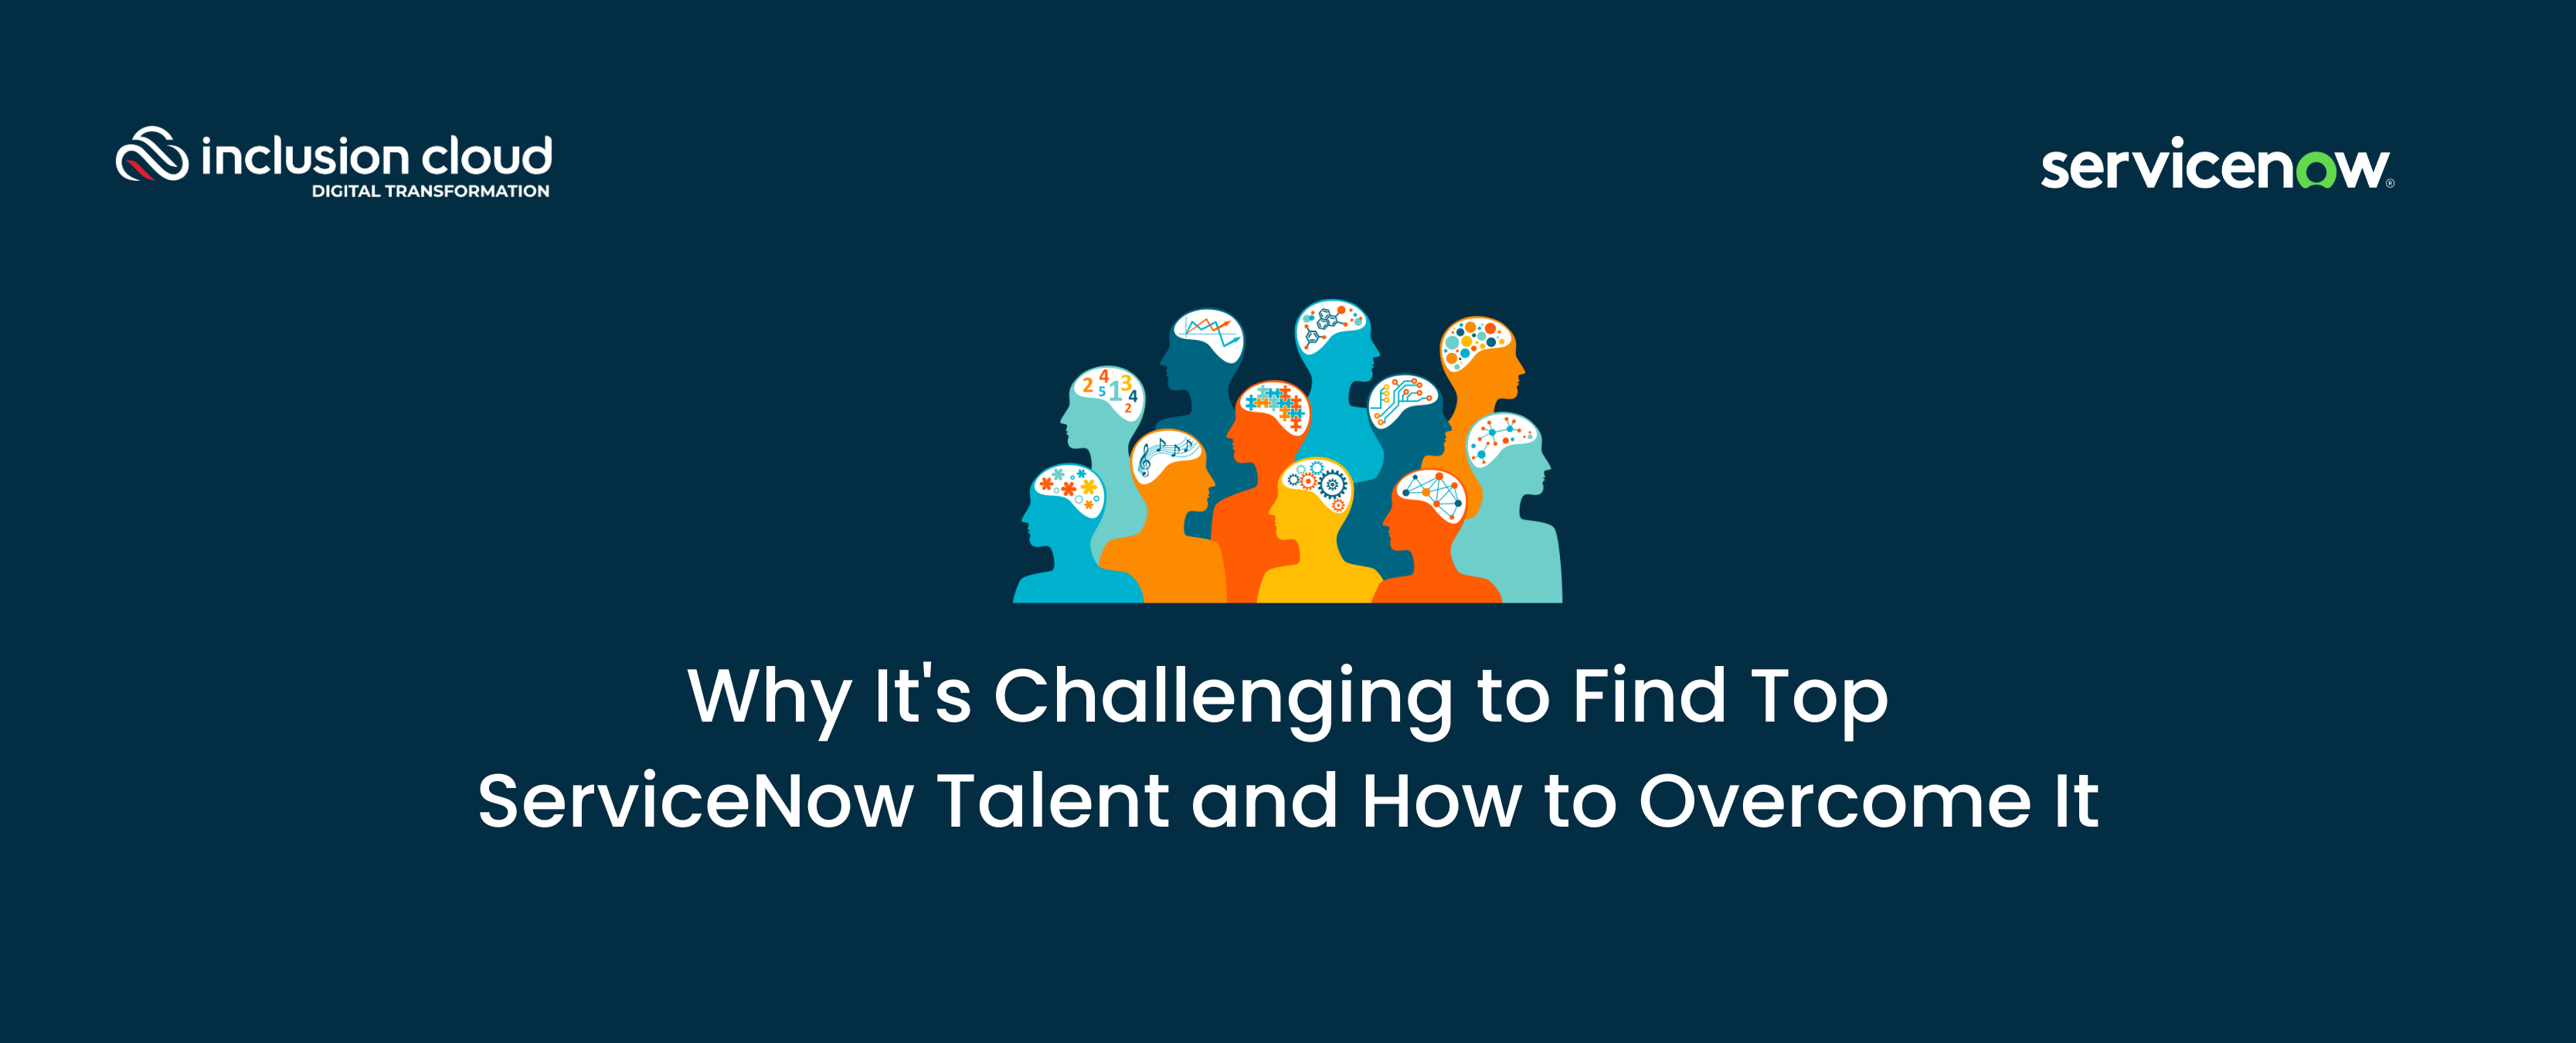 Why It's Challenging to Find Top ServiceNow Talent and How to Overcome It